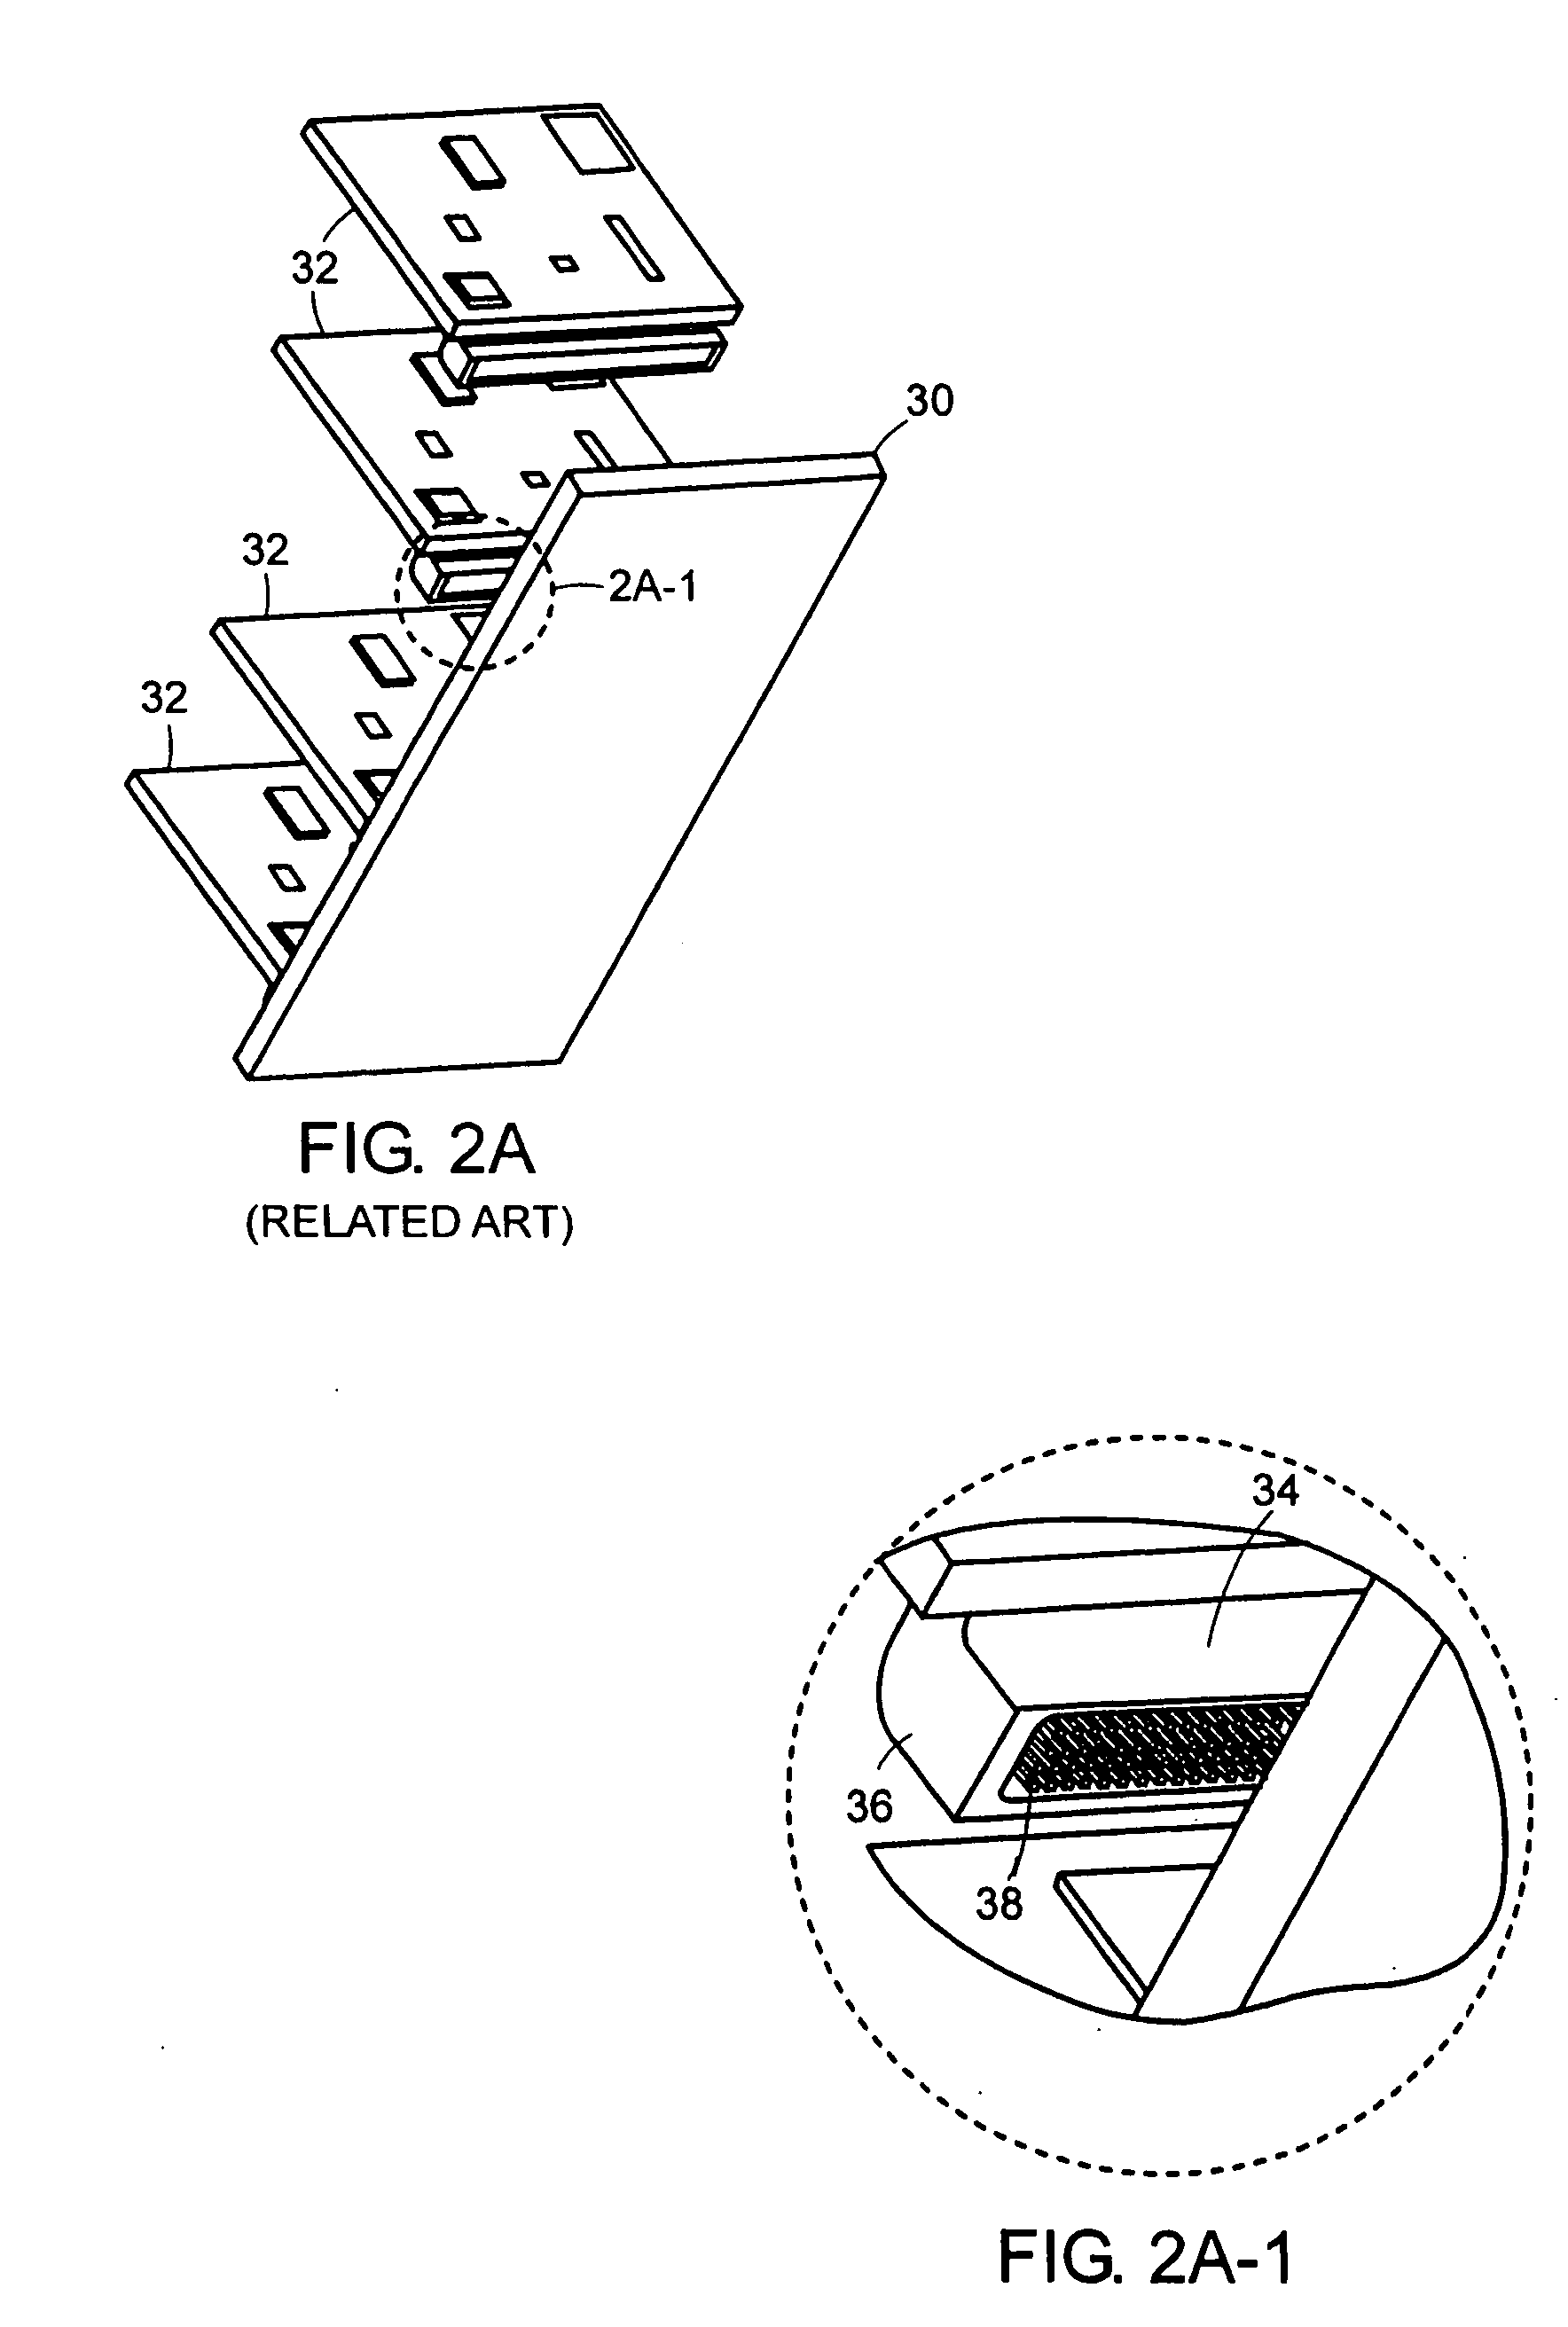 Systems and methods for connecting electrical components